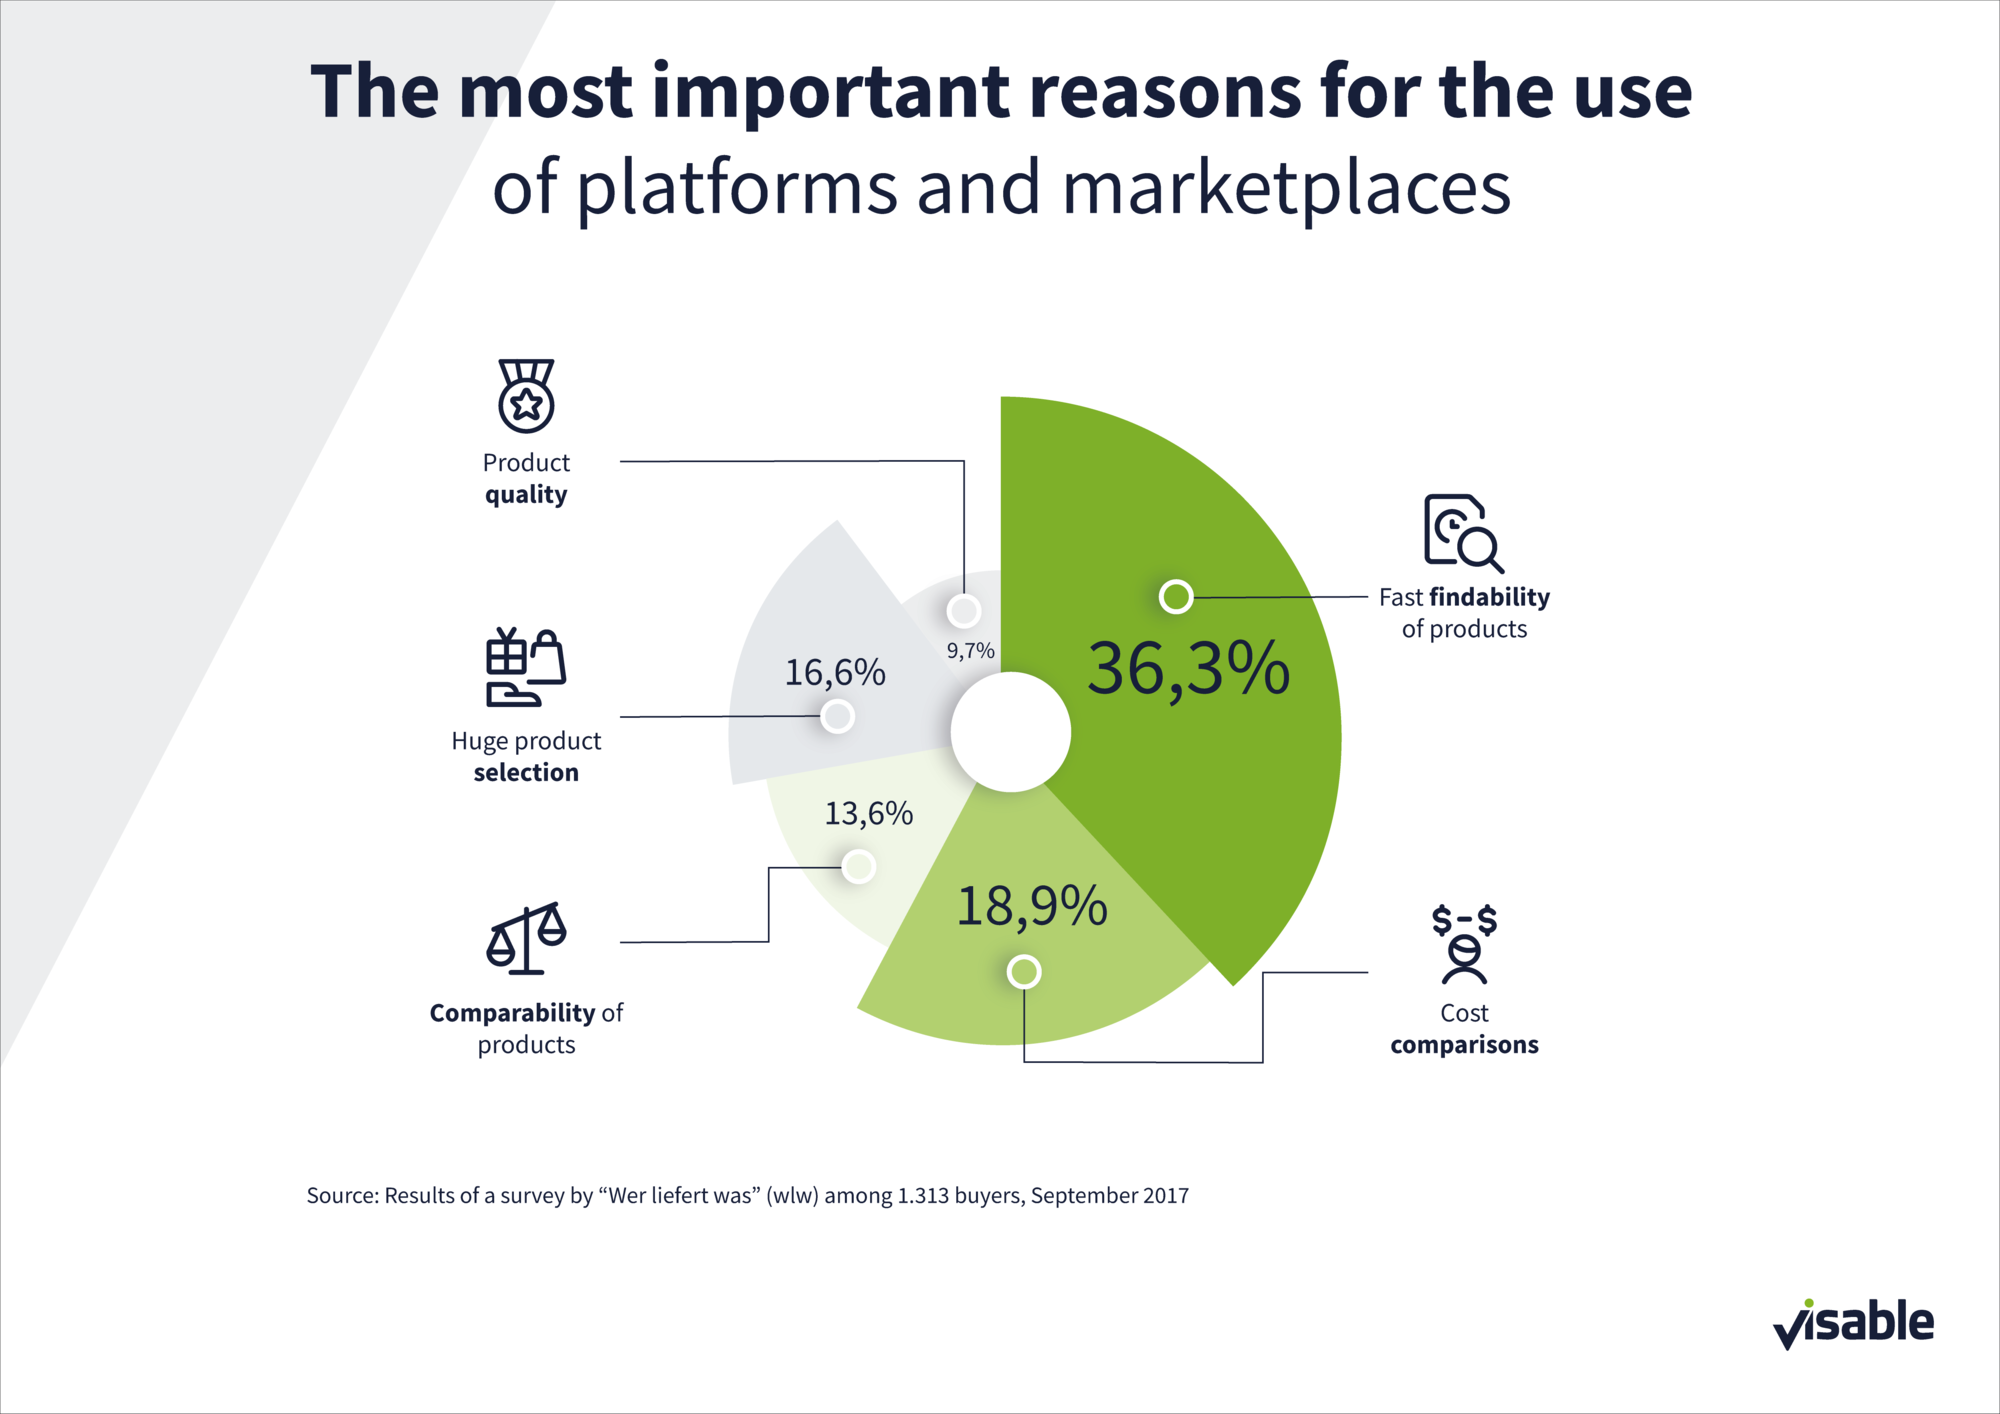 The most important reasons for the use of platforms and marketplaces